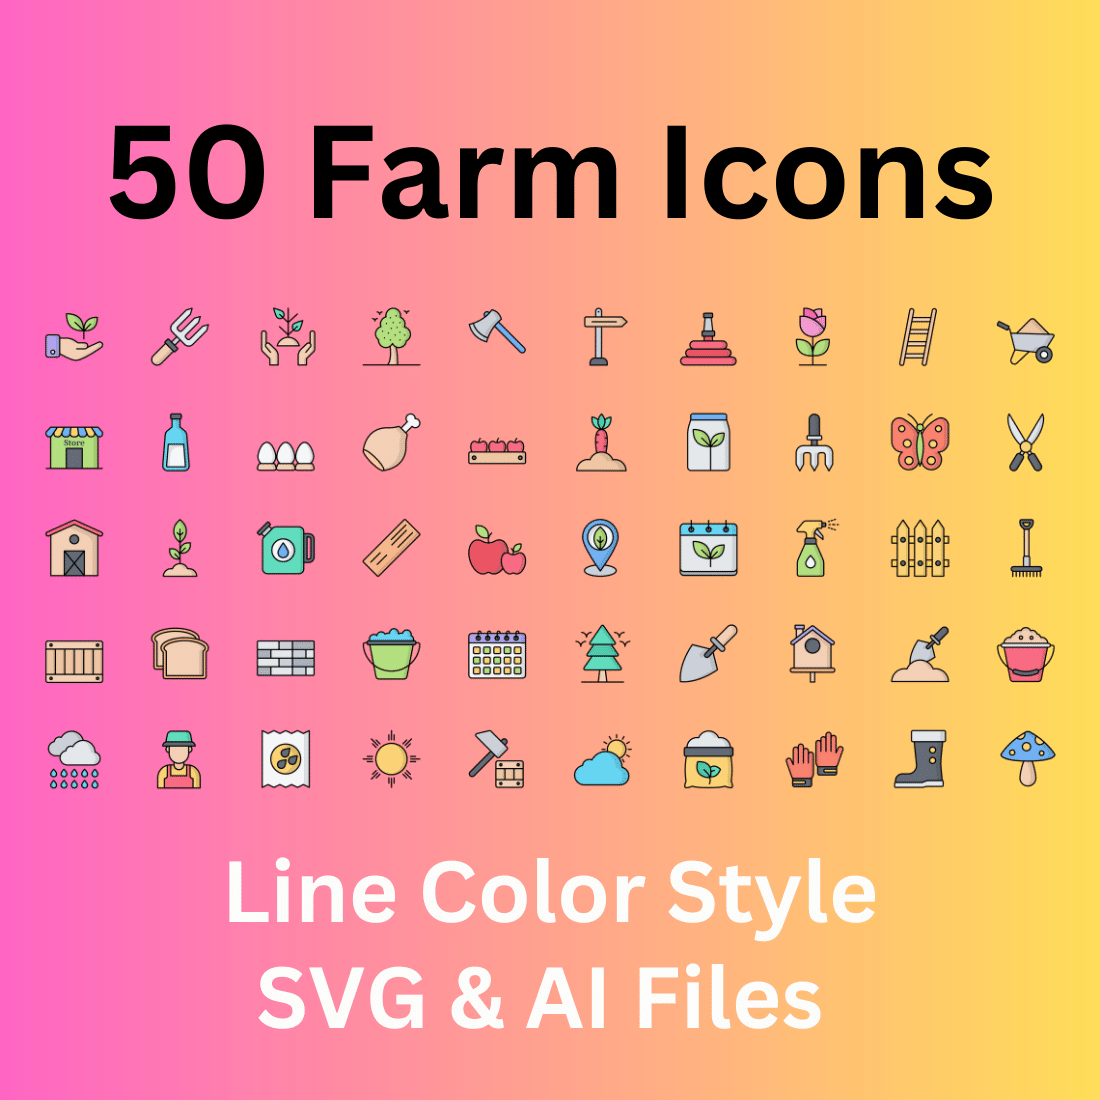 Carpentry Icon Set 50 Line Color Icons - SVG And AI Files cover image.